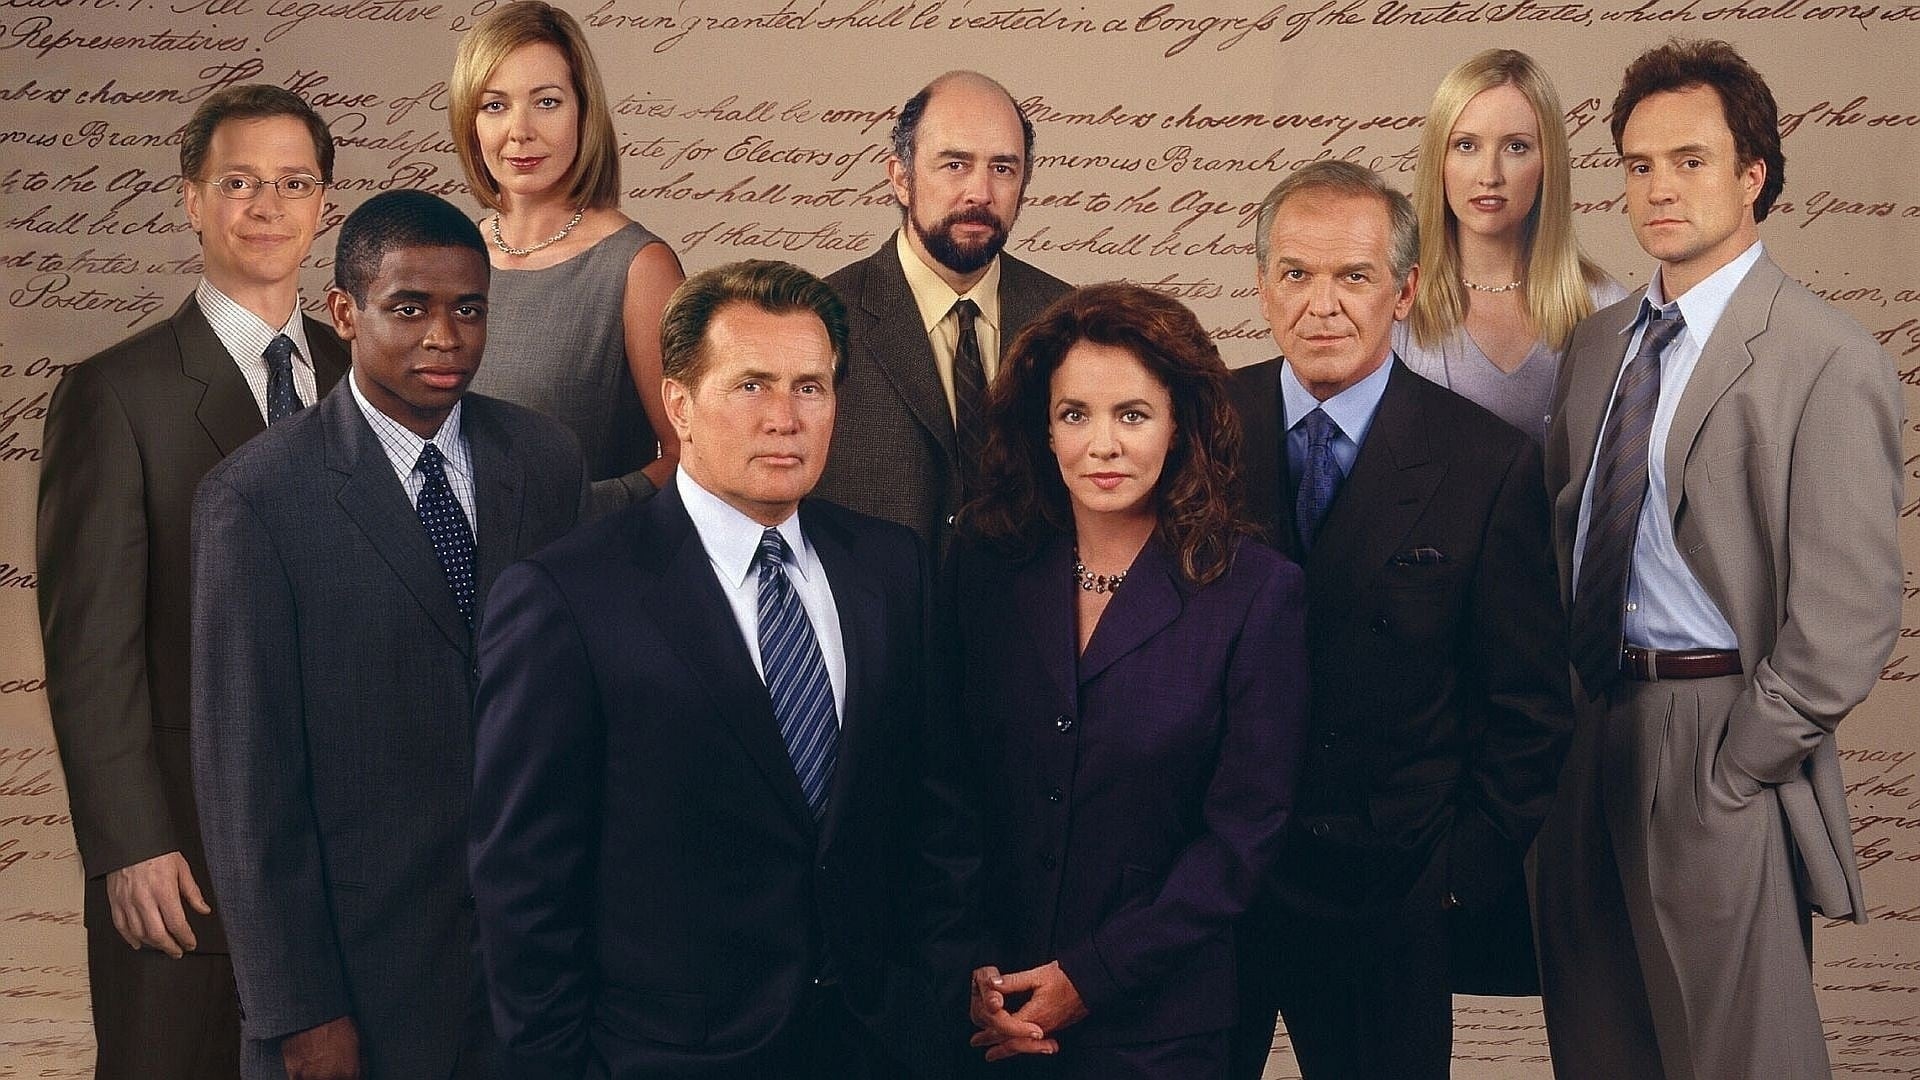 The West Wing (TV Series): President Jed Bartlet and the First Lady Abbey Bartlet, The leading characters. 1920x1080 Full HD Background.